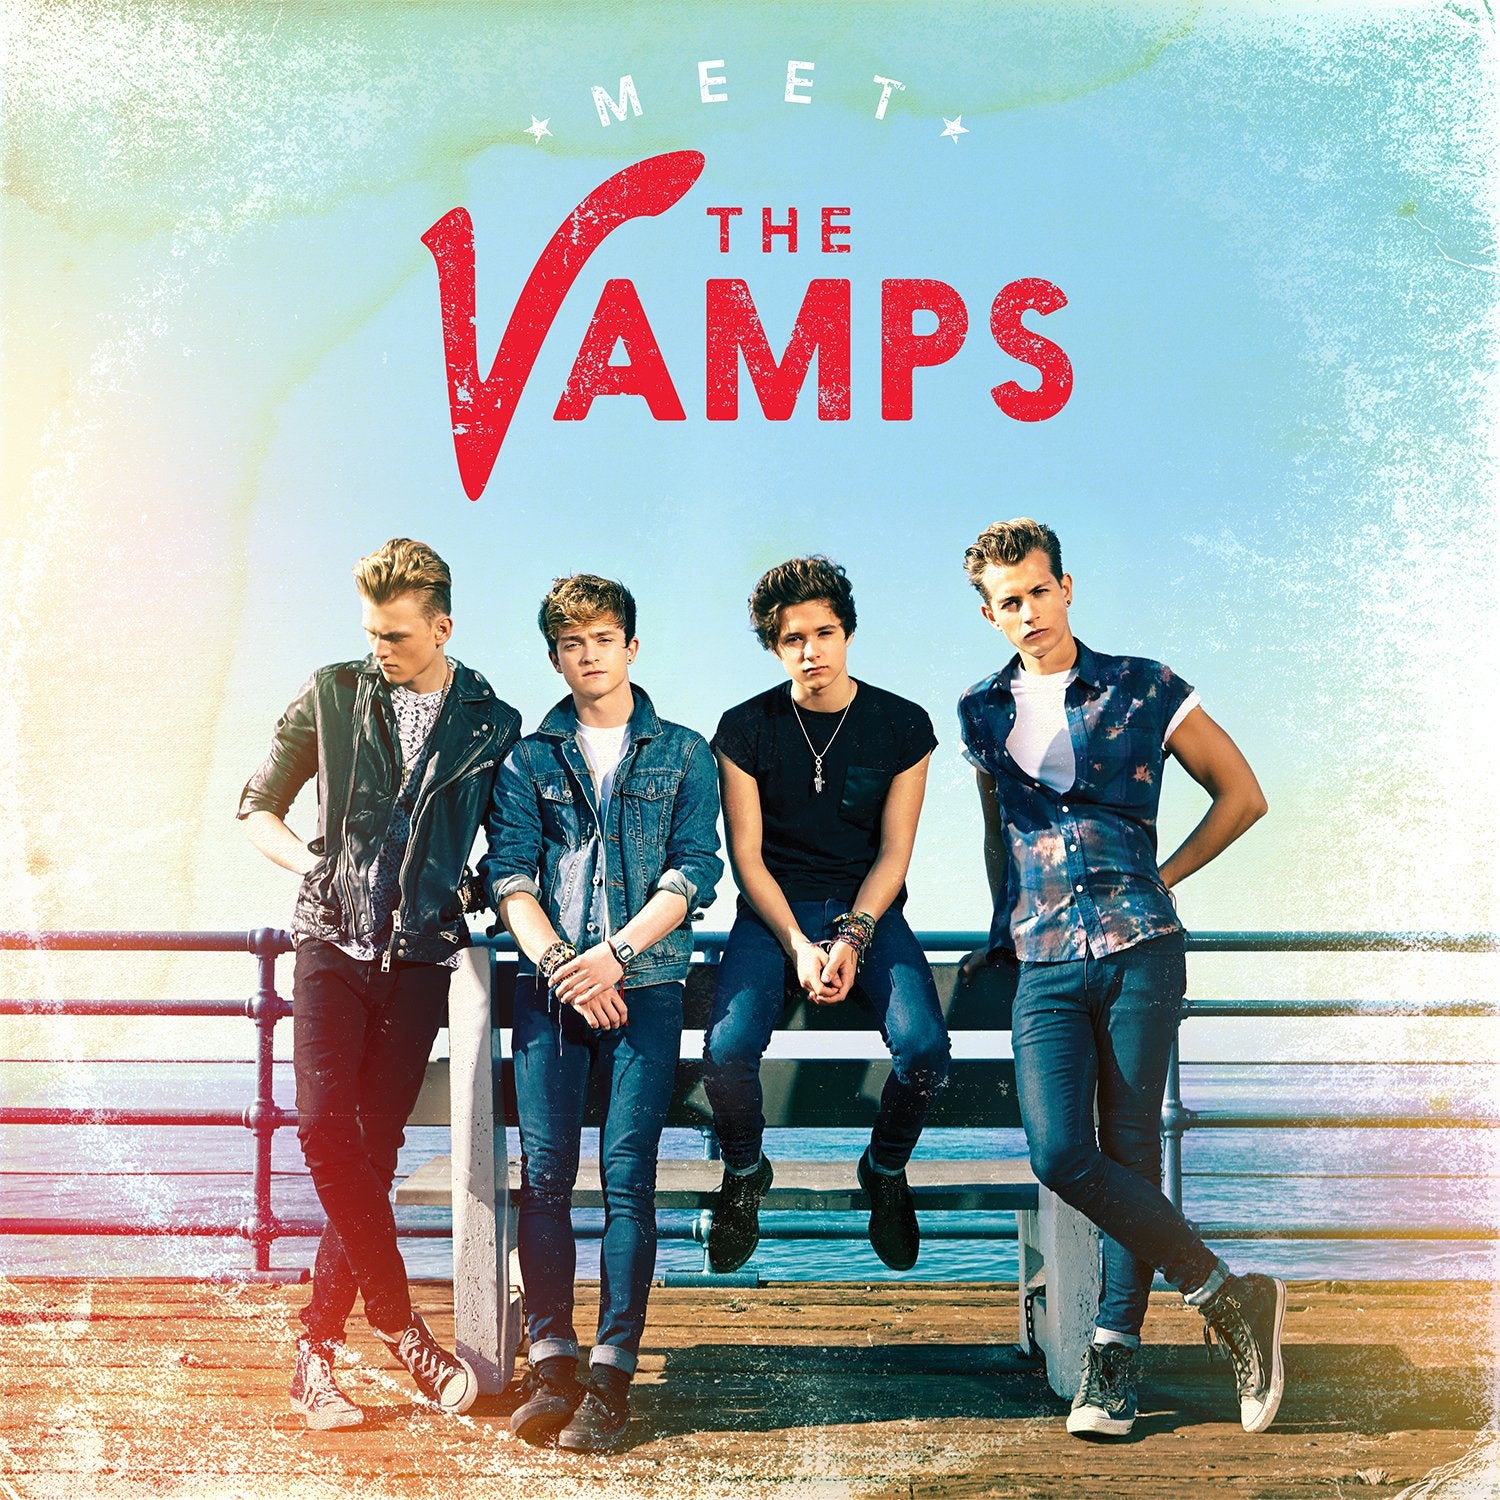 The Vamps- Meet The Vamps - Darkside Records